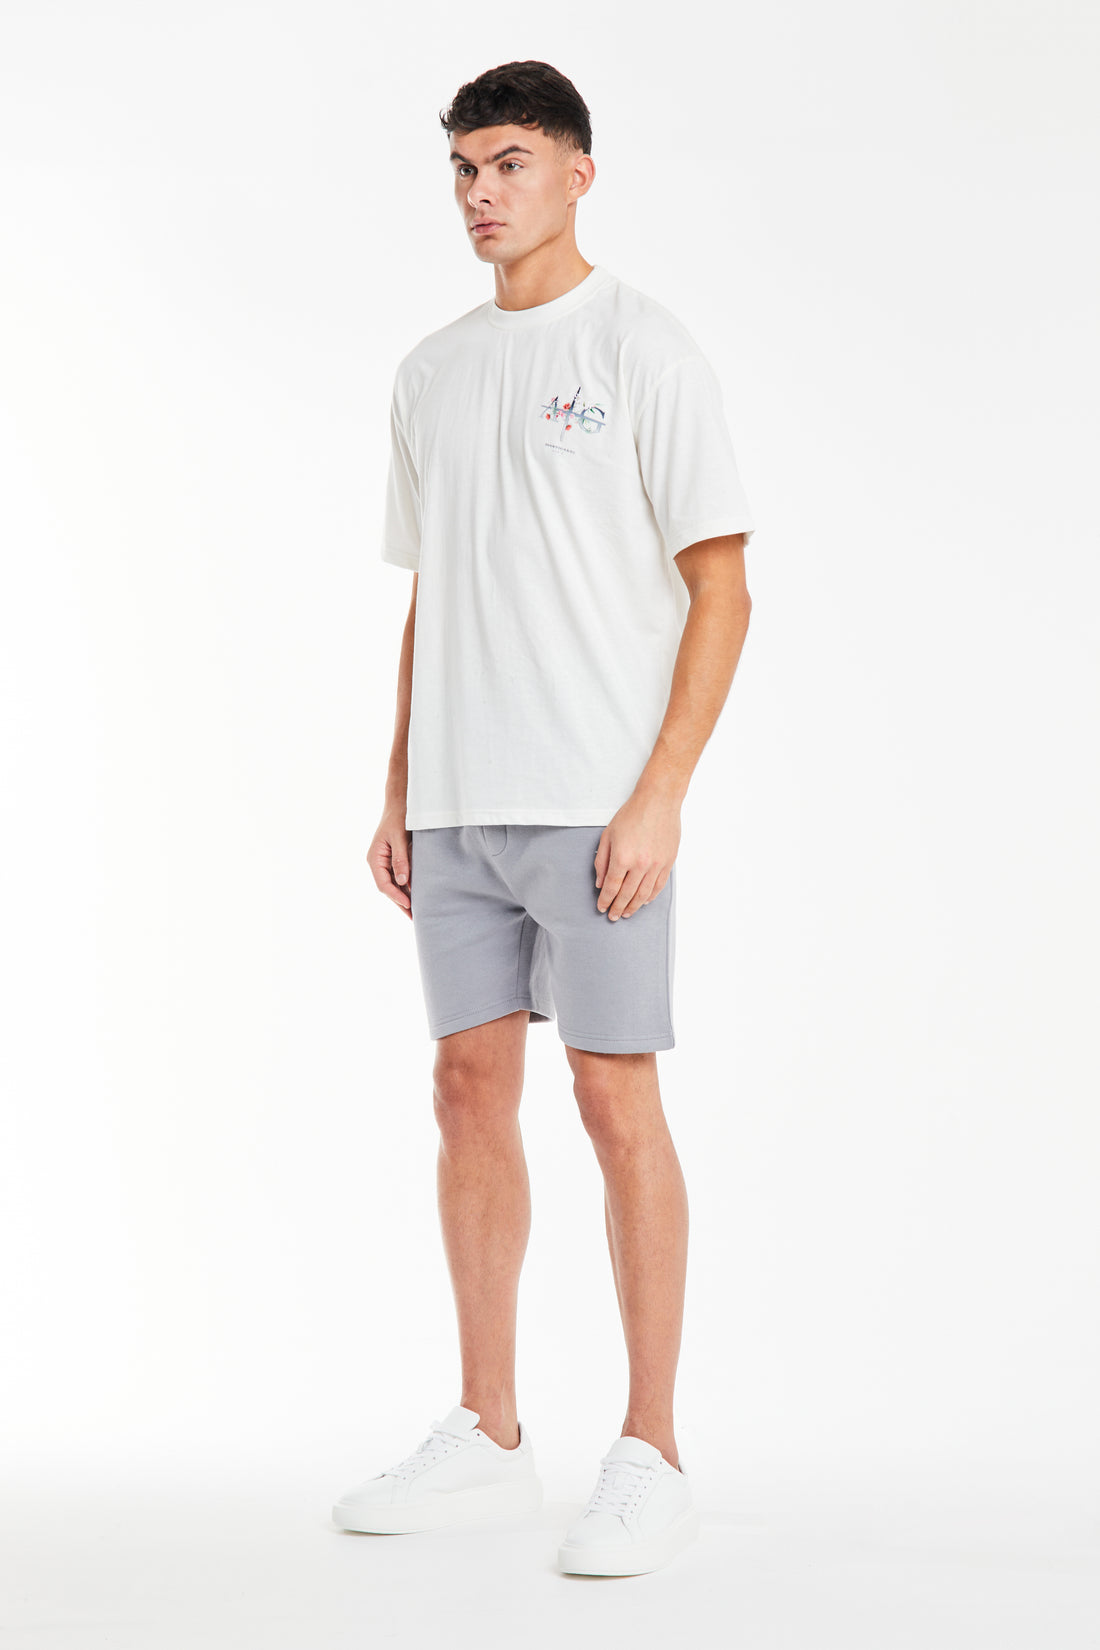 Model styled in white t shirt sale styled with shorts